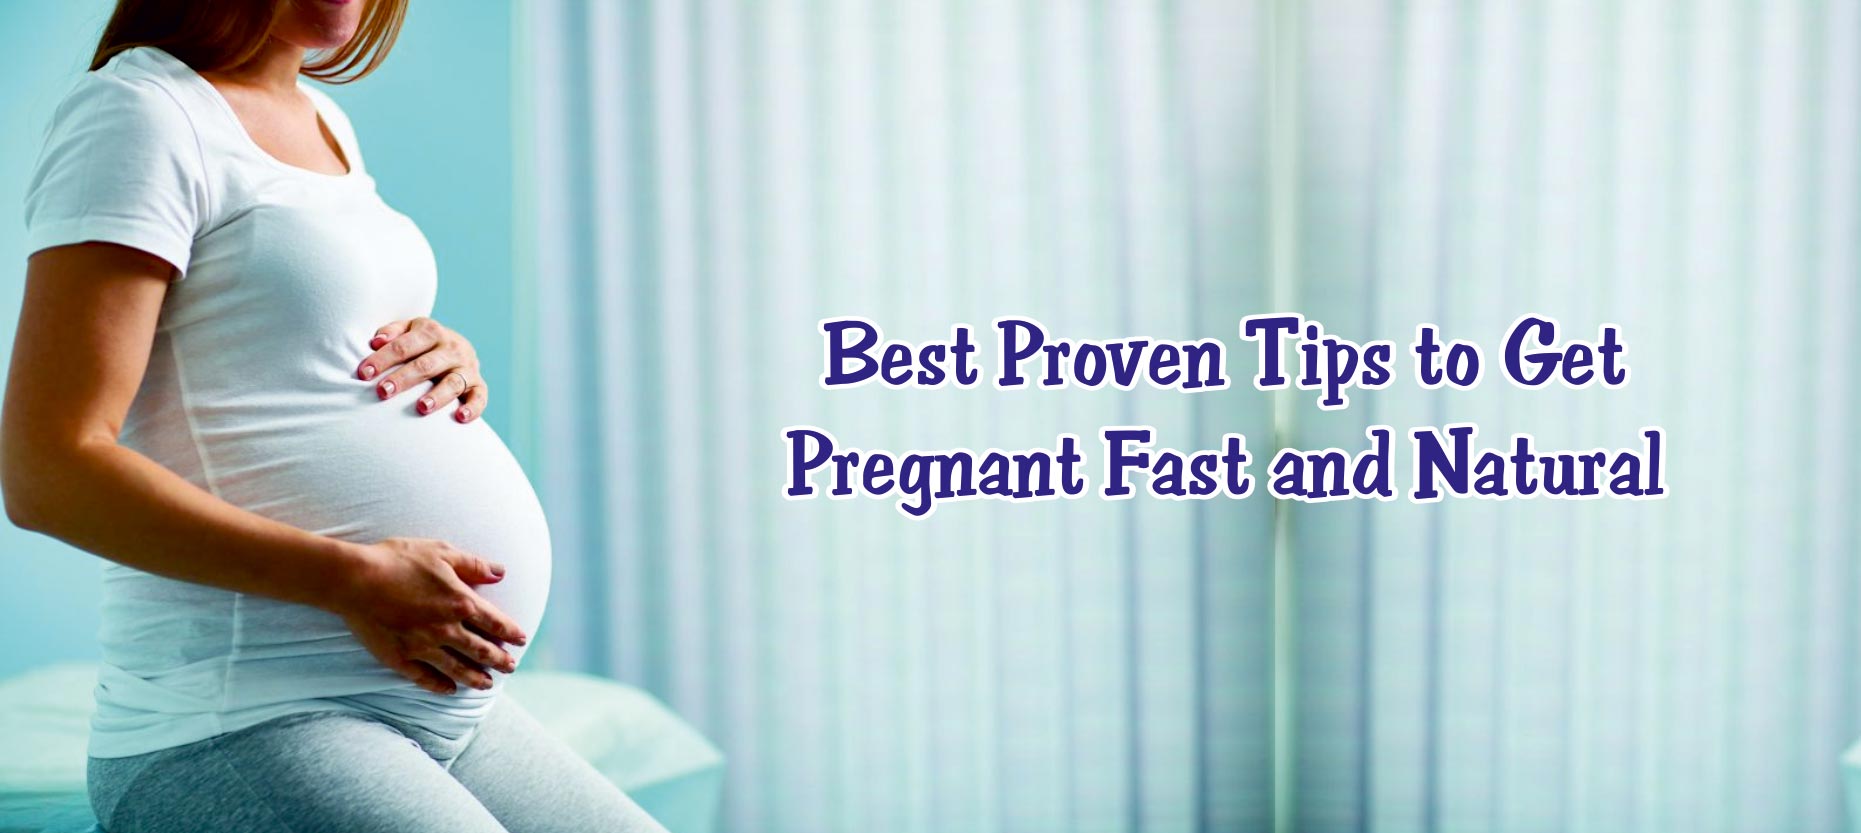 Tips To Get Pregnant Fast And Natural